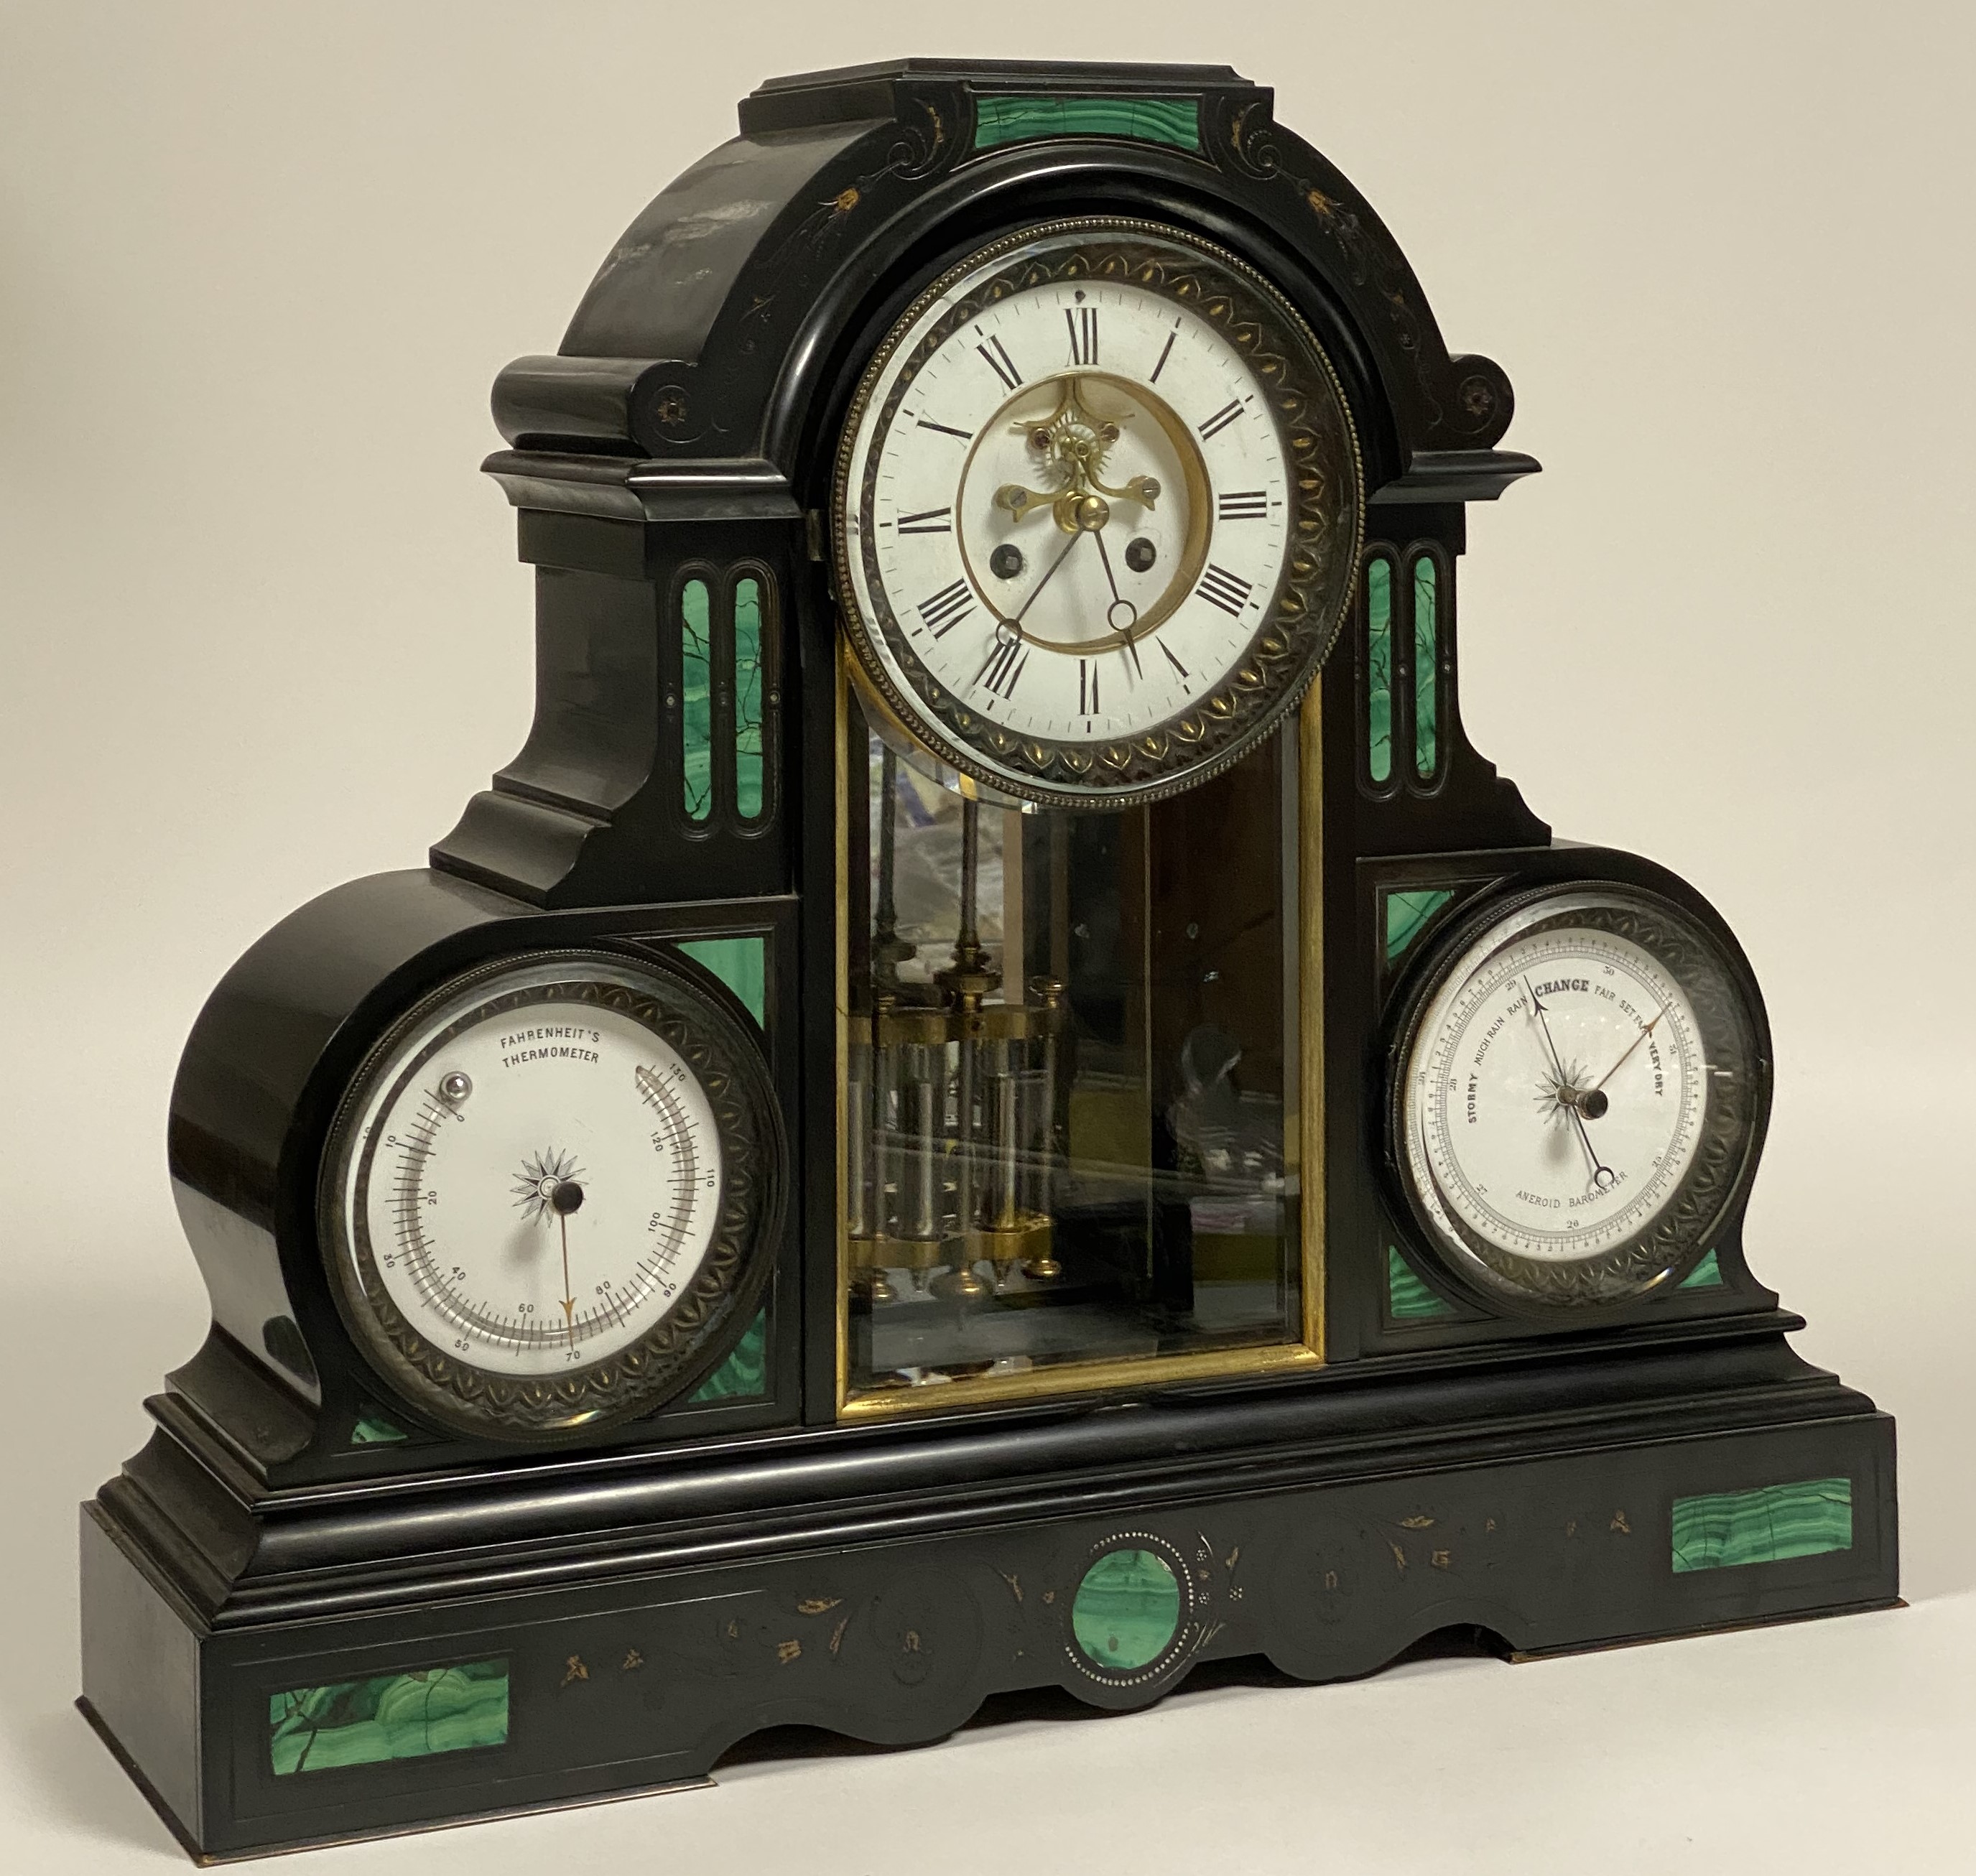 A 19th century slate mantel clock, the case, of architectural form, with incised gilt floral